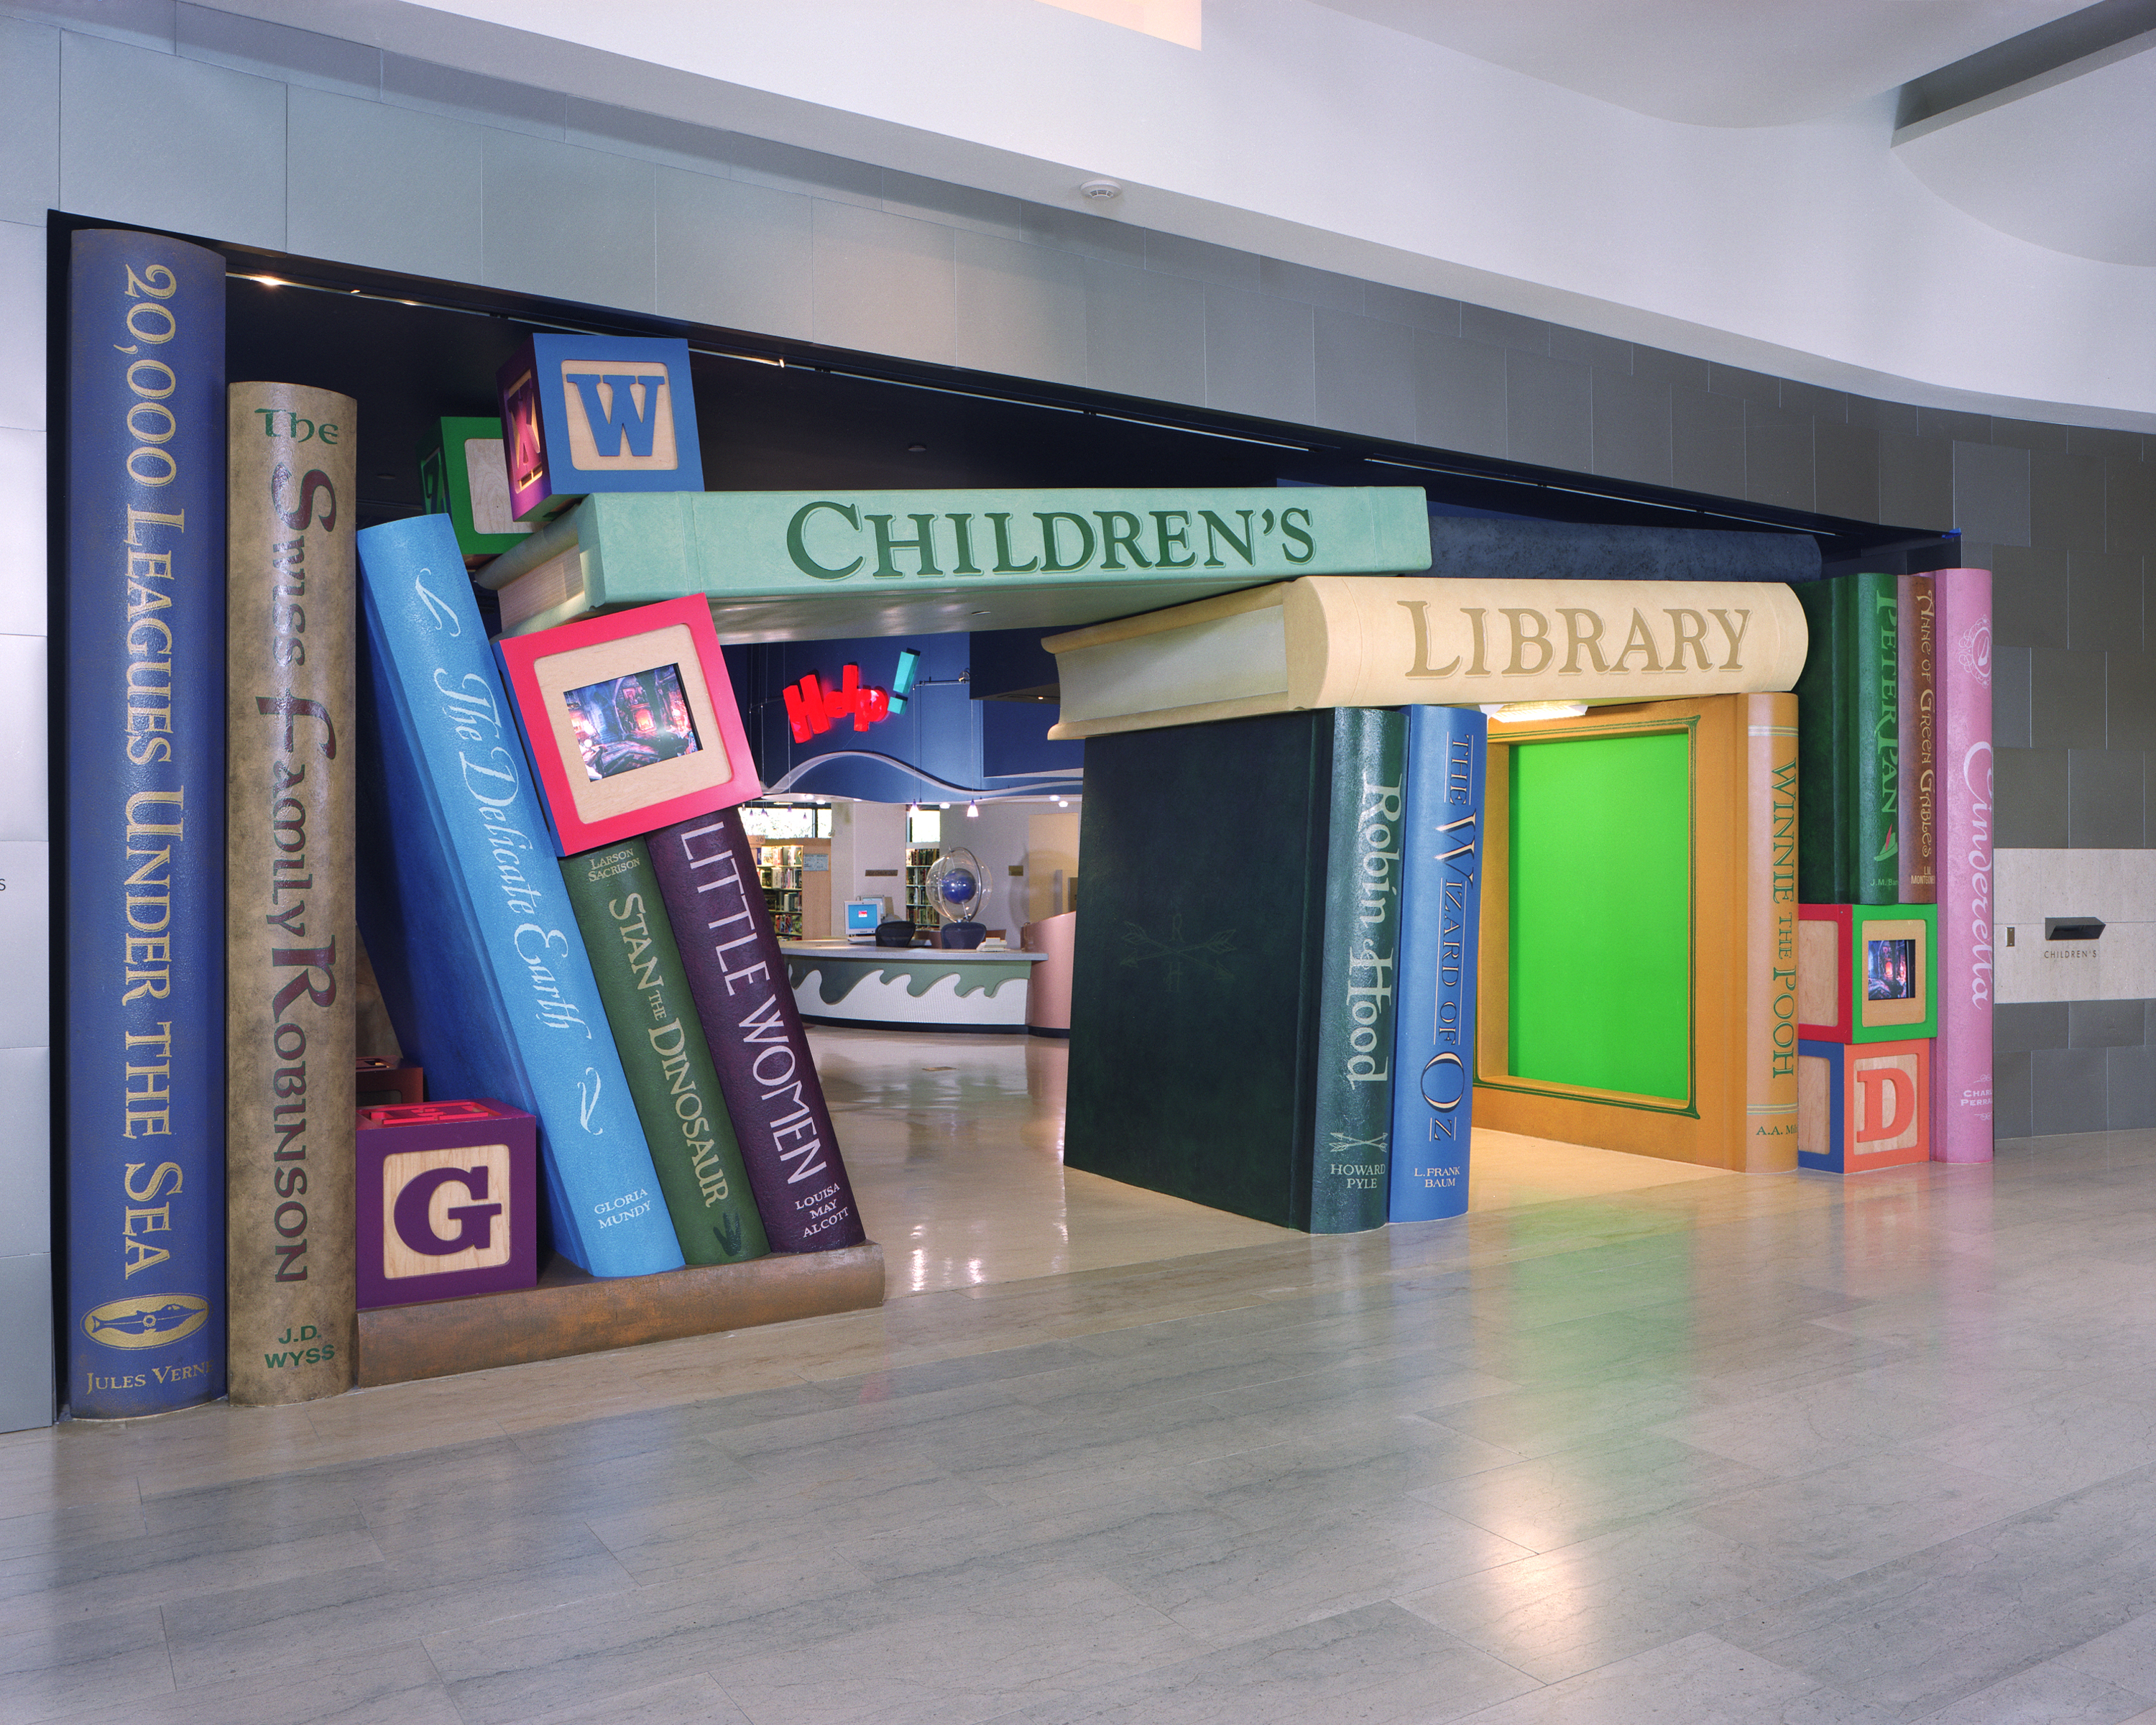 Image of the Children's Library